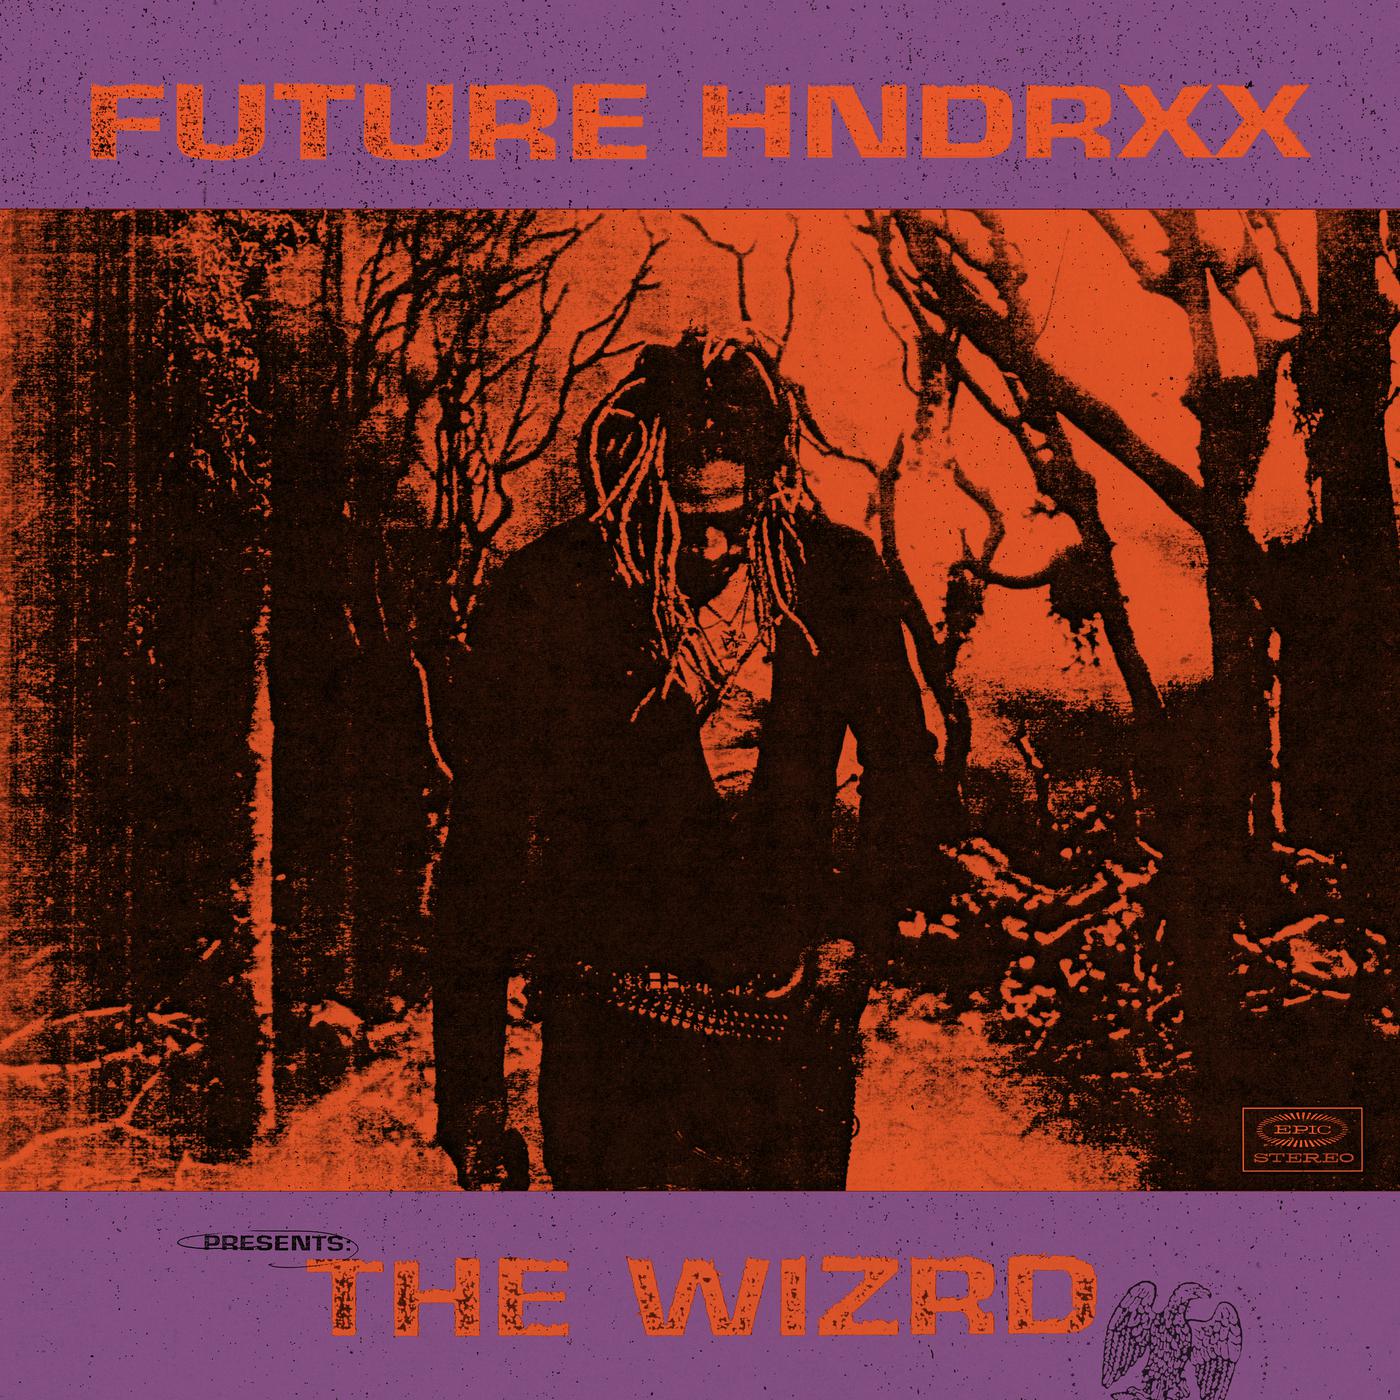 Crushed Up歌词 歌手Future-专辑Future Hndrxx Presents: The WIZRD-单曲《Crushed Up》LRC歌词下载